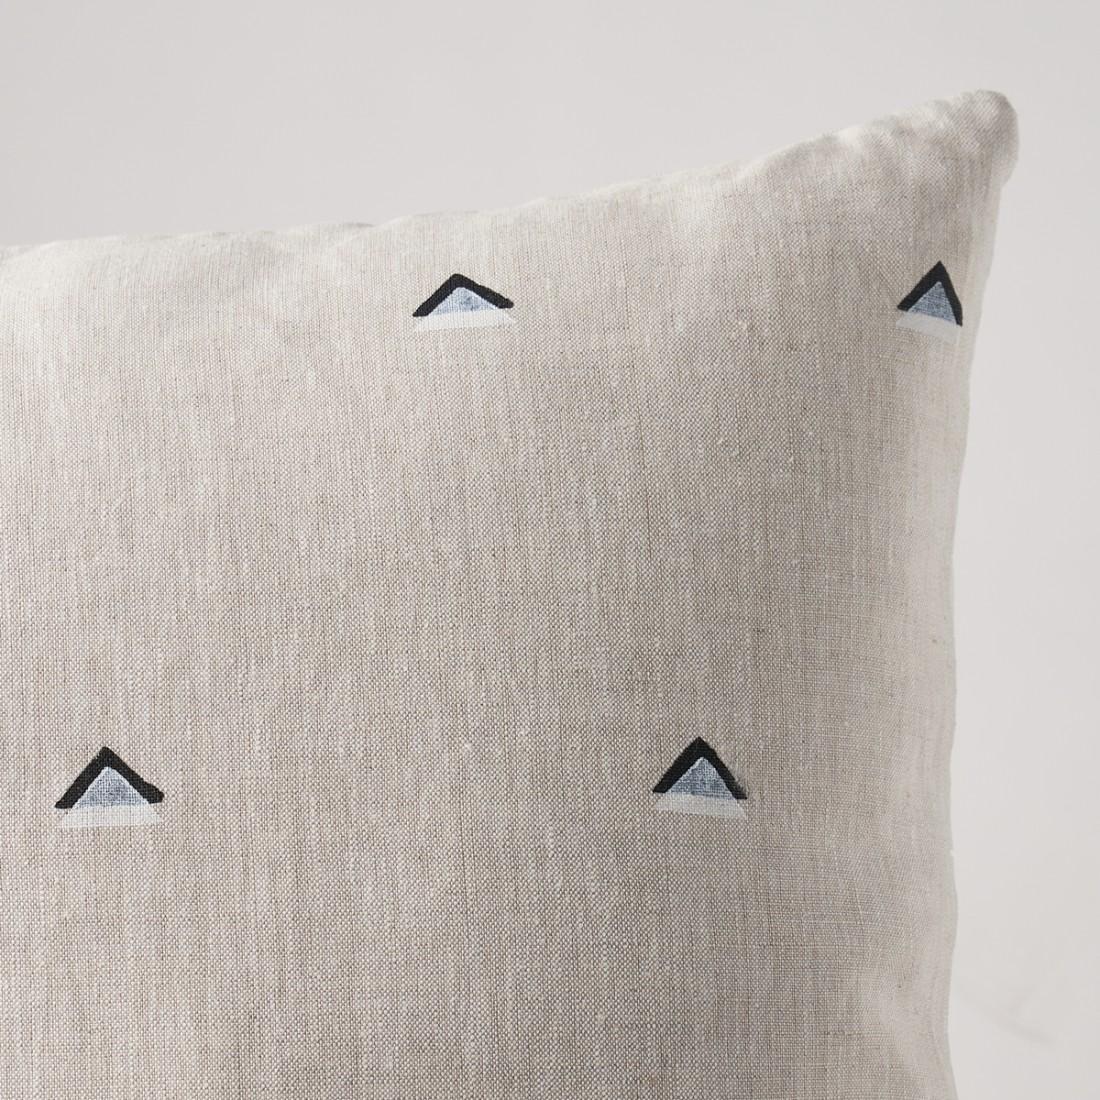 This pillow features Overlapping Triangles by Caroline Z Hurley with a knife edge finish. Designed by Caroline Z Hurley in her Brooklyn studio and block-printed in New Bedford, Massachusetts.. Each shape is cut and individually stamped onto the